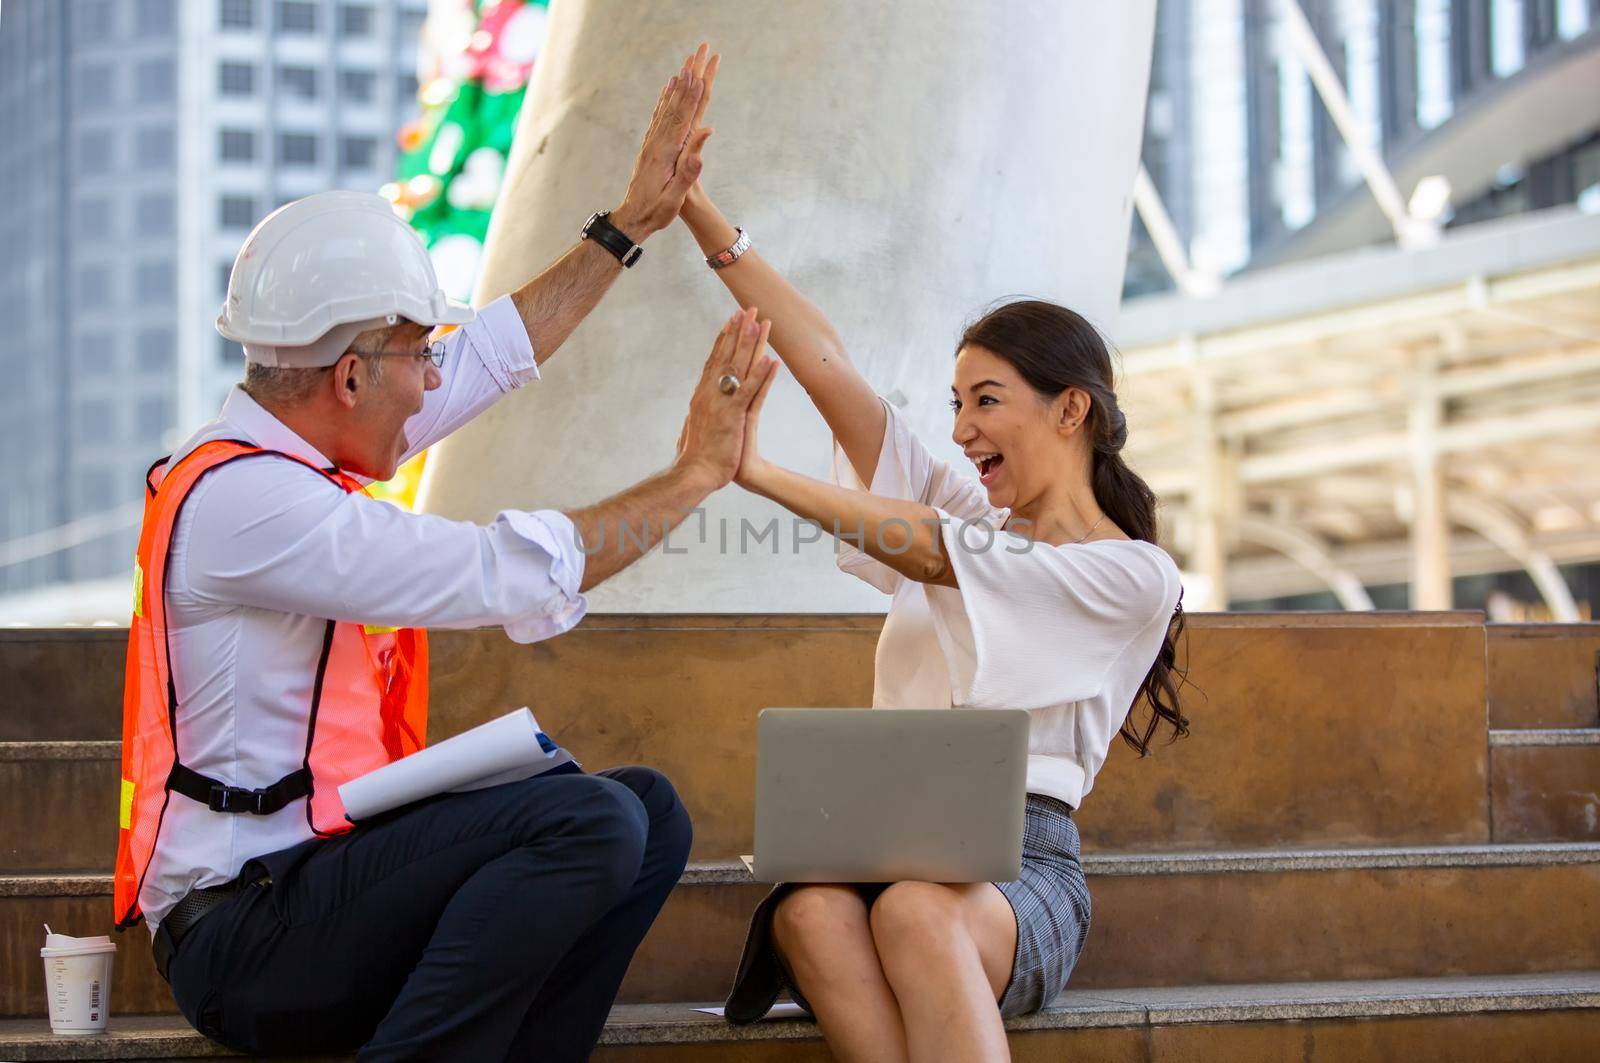 The engineer and business people hand high five against building. The concept of engineering, construction, city life and future.